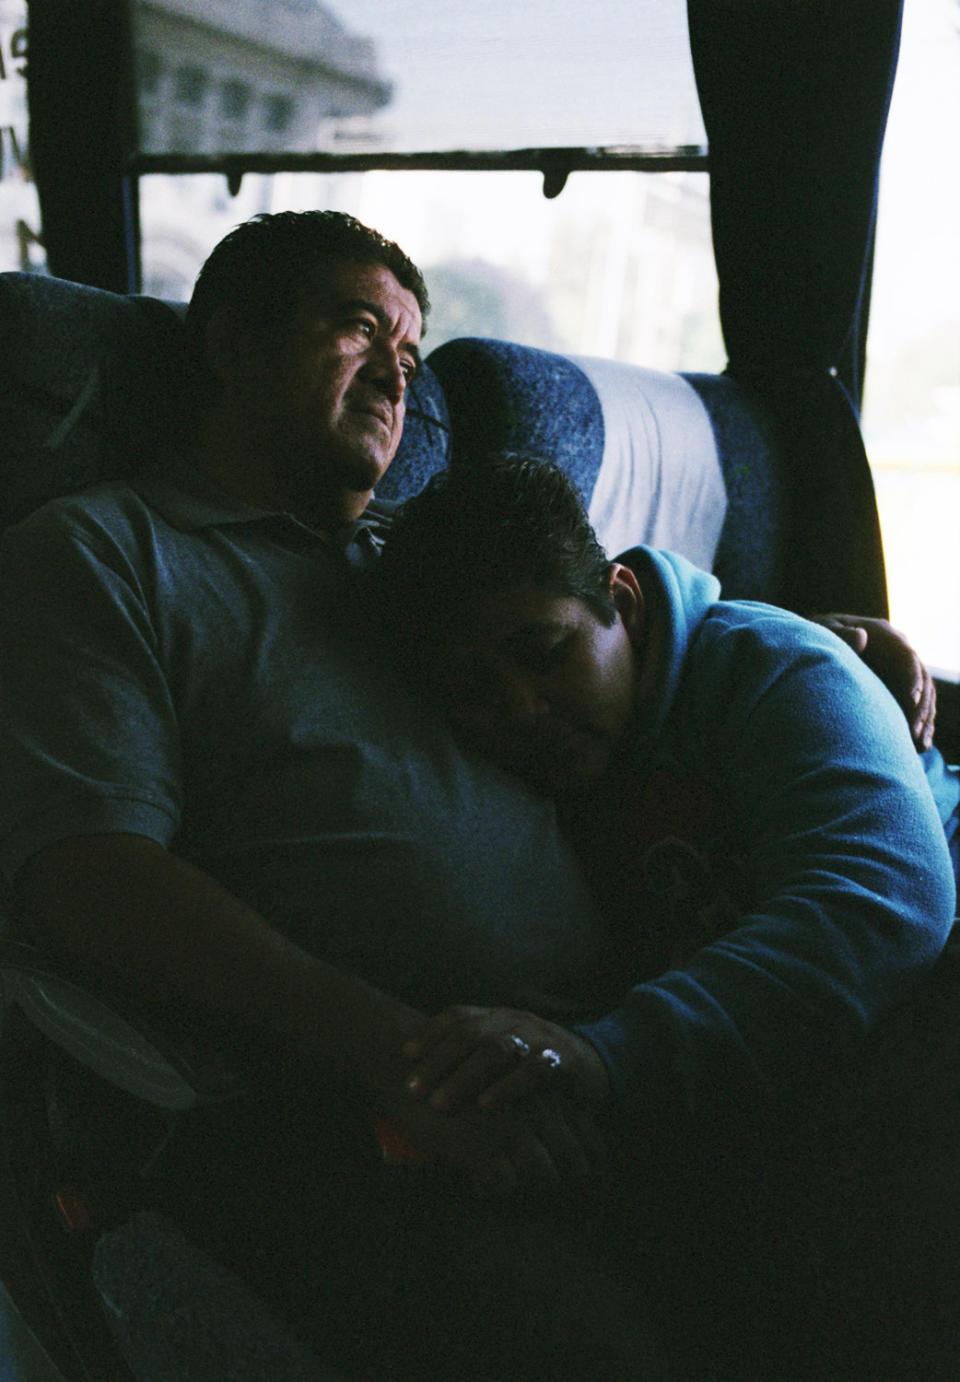 Epifanio &Aacute;lvarez Carbajal and Blanca Luz Nava V&eacute;lez, parents of missing Ayotzinapa student Jorge &Aacute;lvarez Nava, rest on the bus during a week of marching and organizing in Mexico City on Jan.&nbsp;24, 2015.